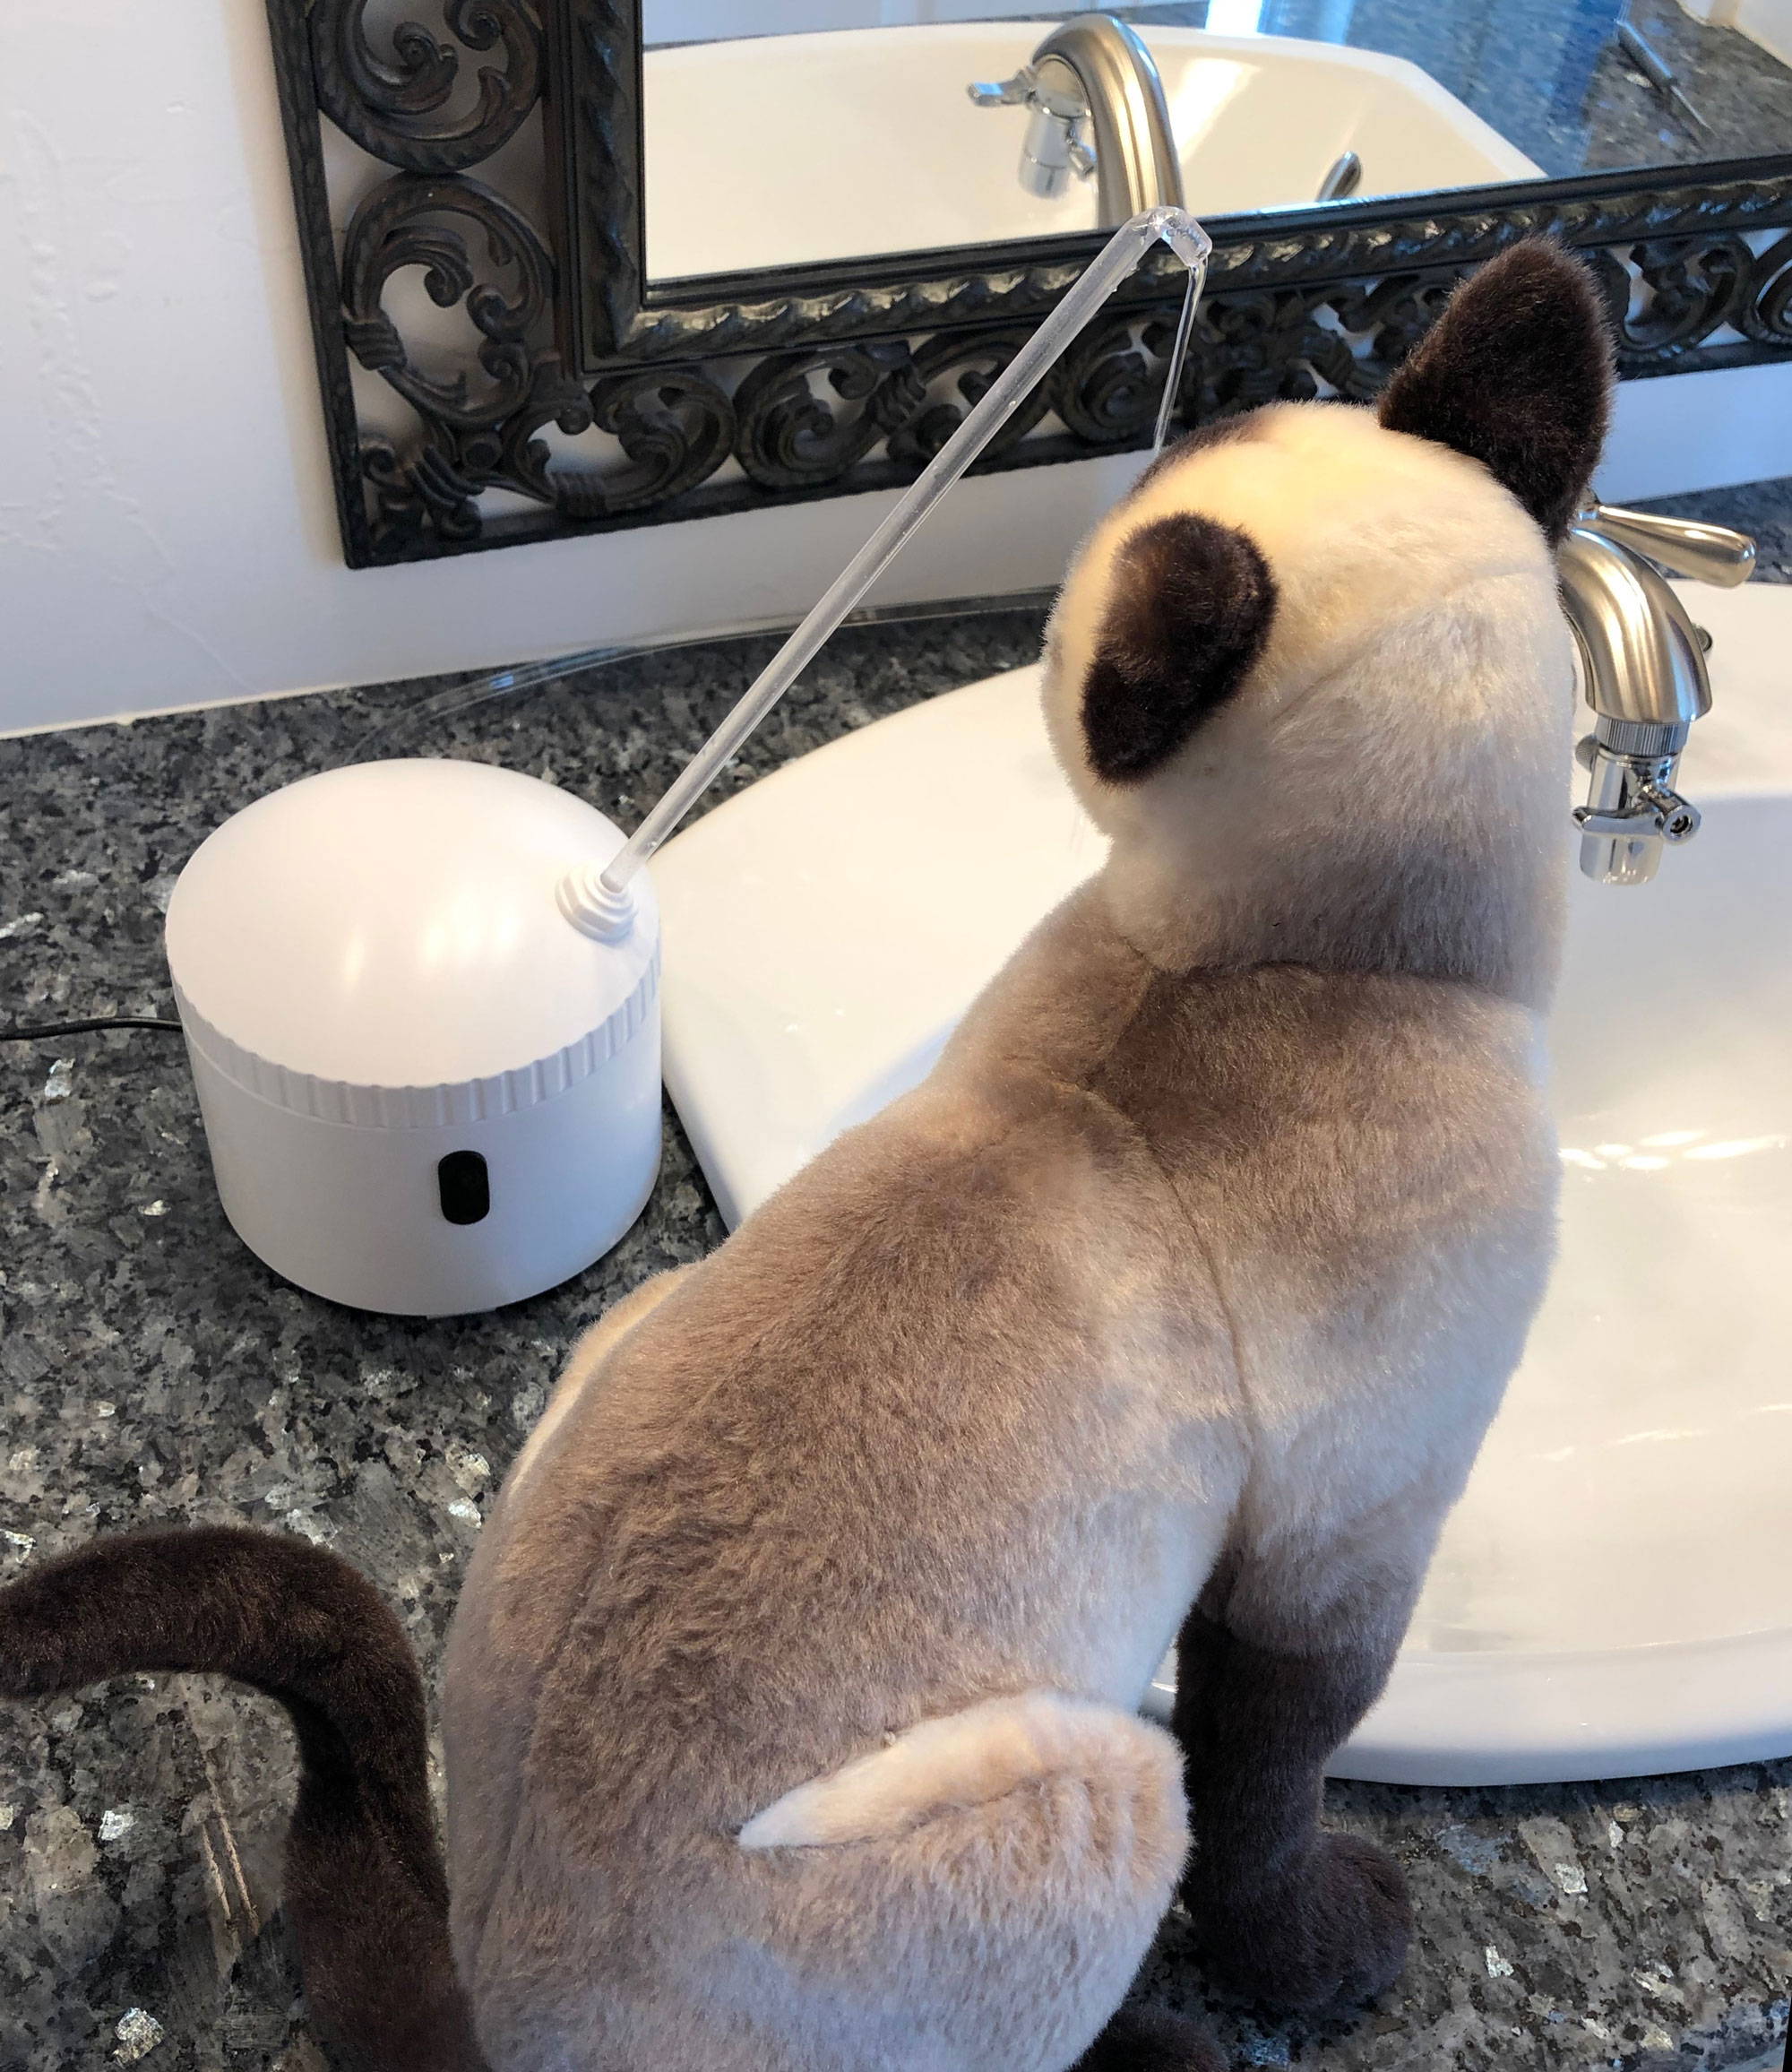 Stuffy the cat posing next to the AquaPurr installed at a bathroom sink